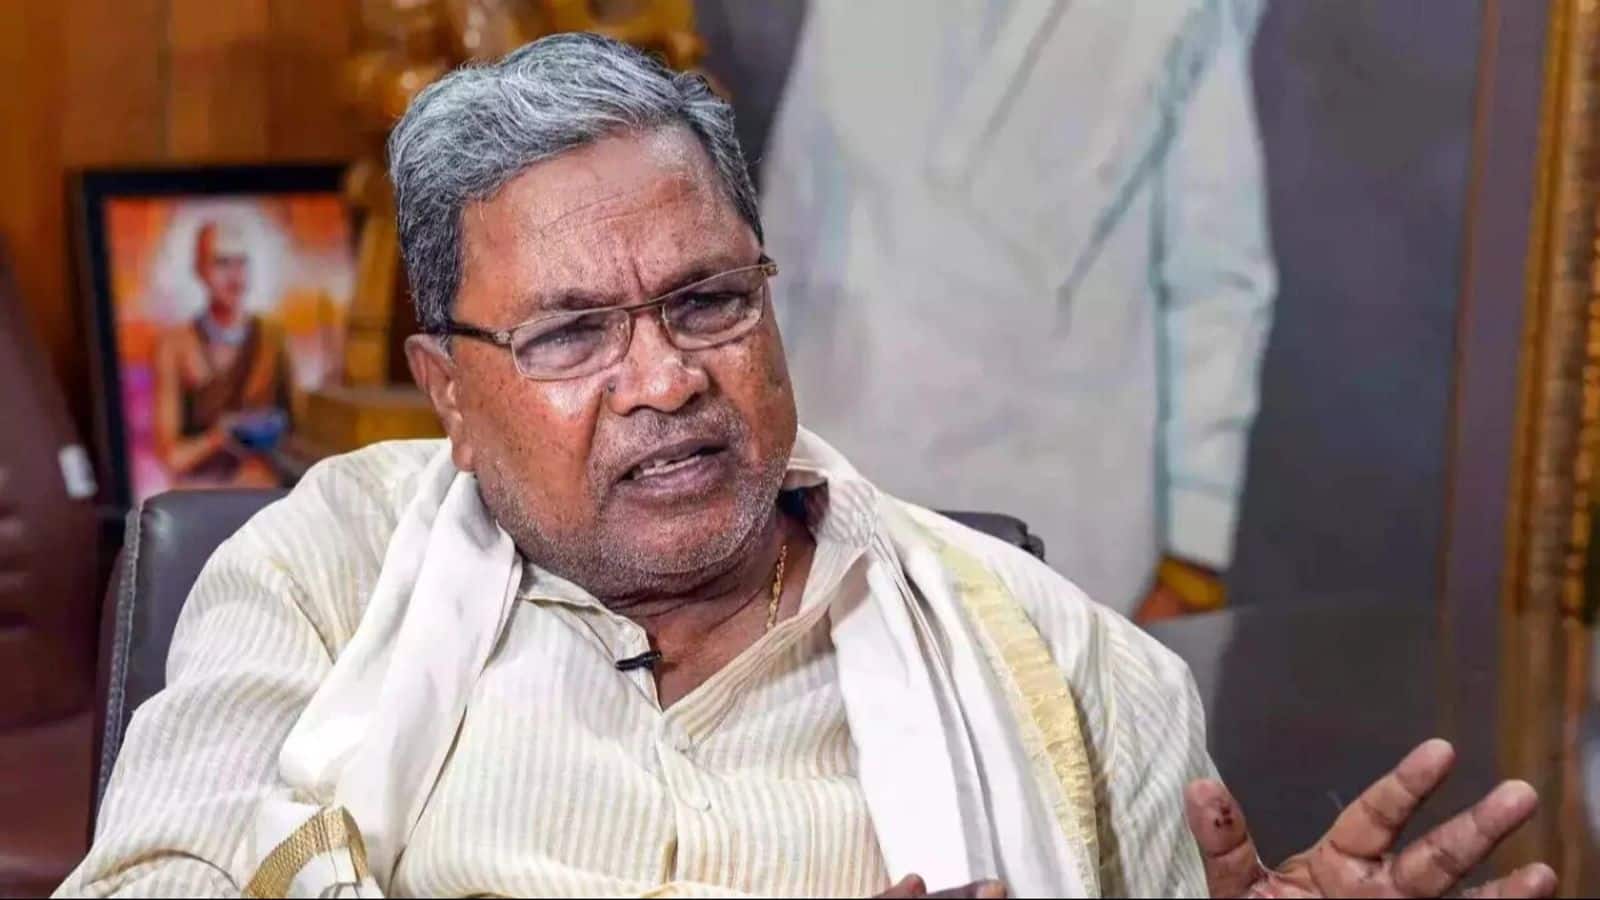 BJP 'offered ₹50 crore' to Congress MLAs, claims Siddaramaiah